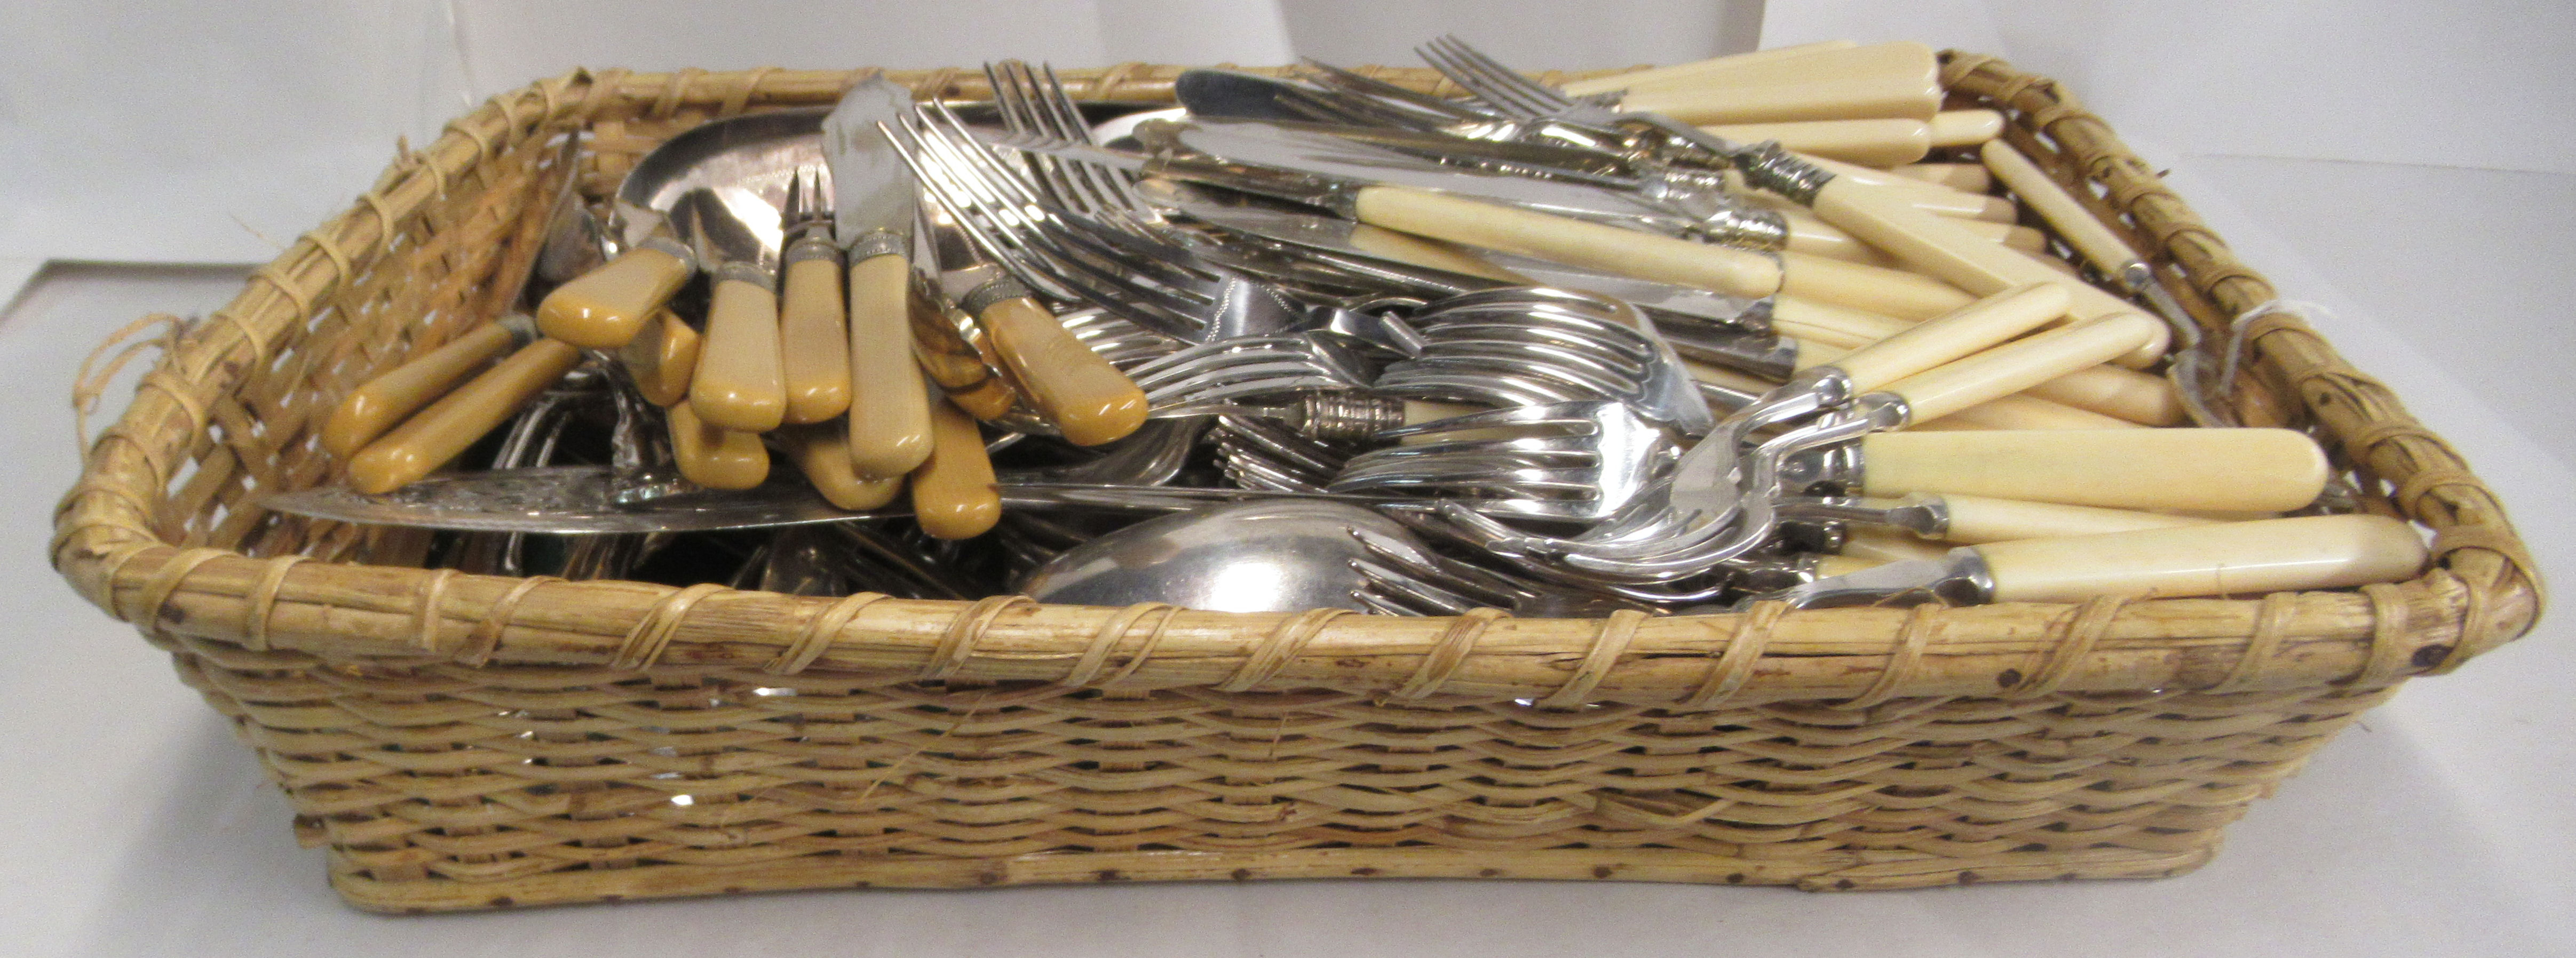 Variously patterned Mappin & Webb and other EPNS cutlery and flatware